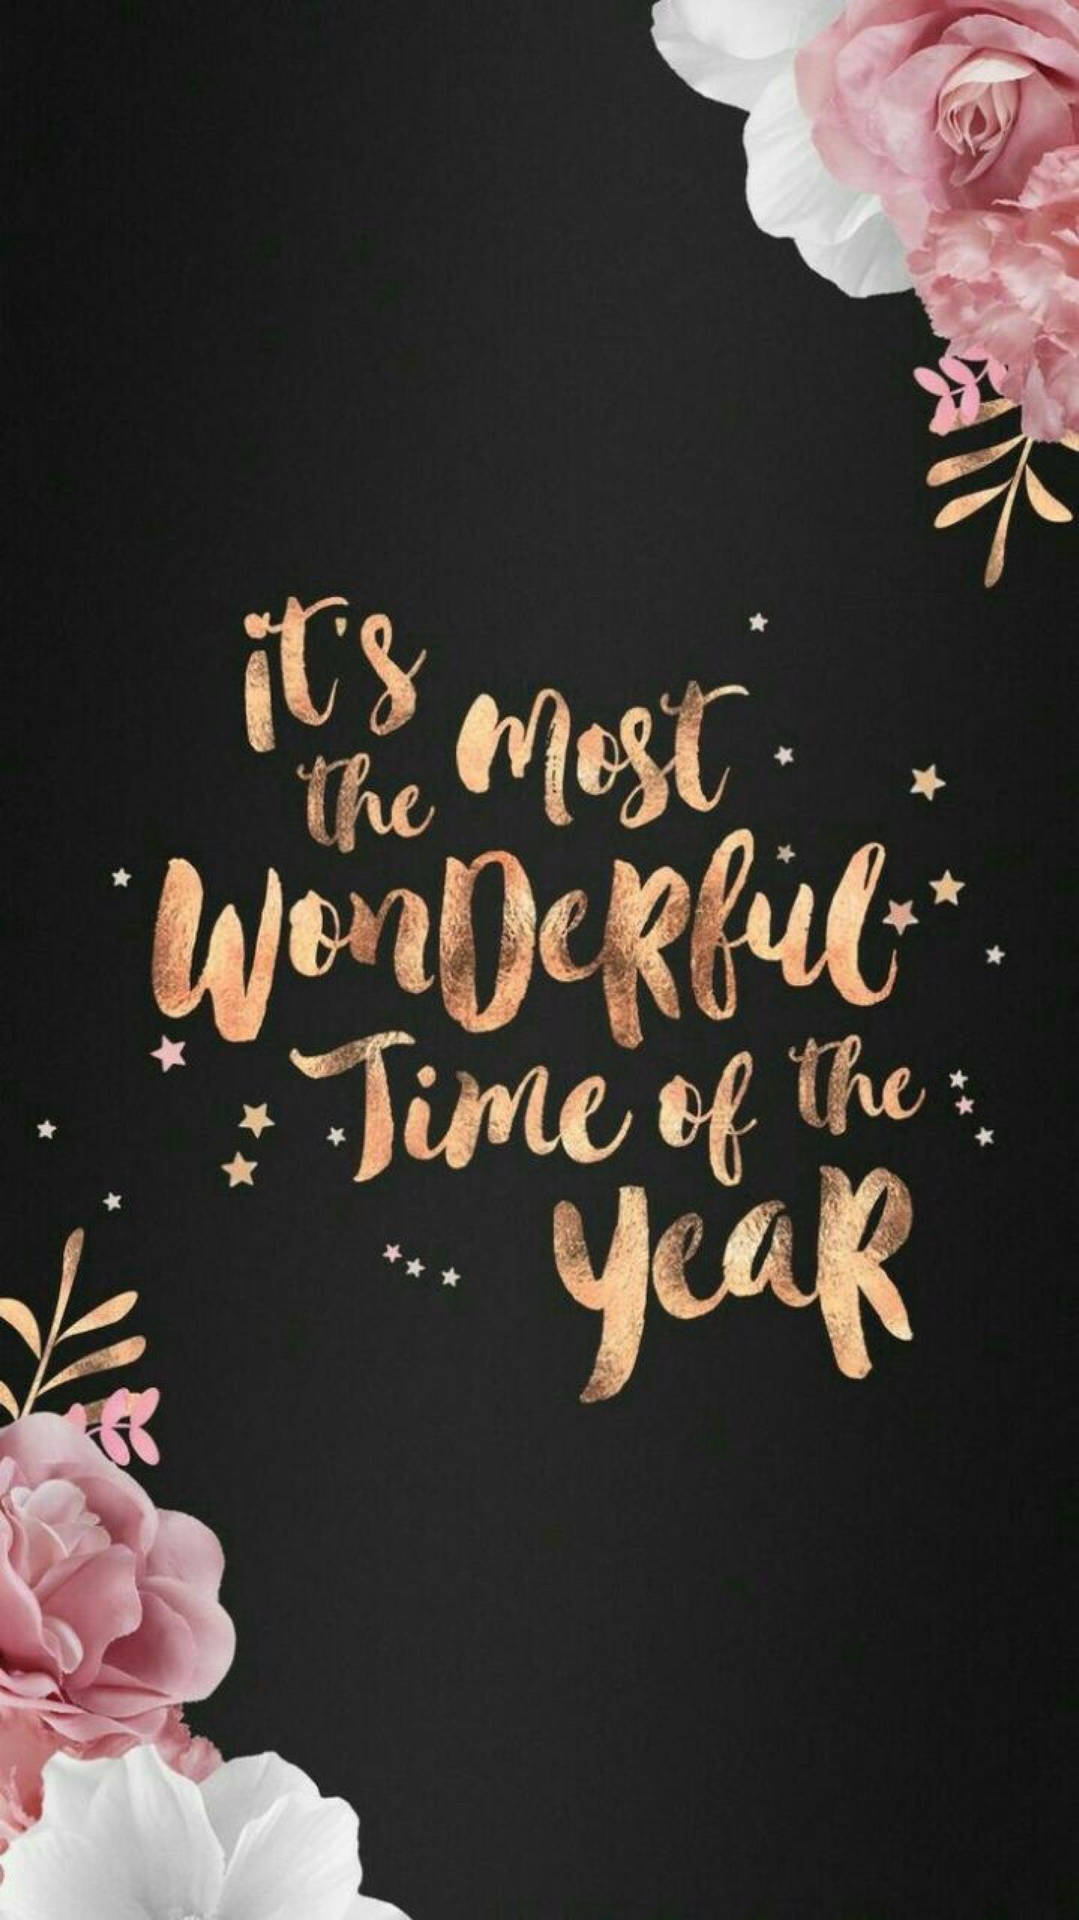 Time Of The Year Motivational Quotes Iphone Wallpaper